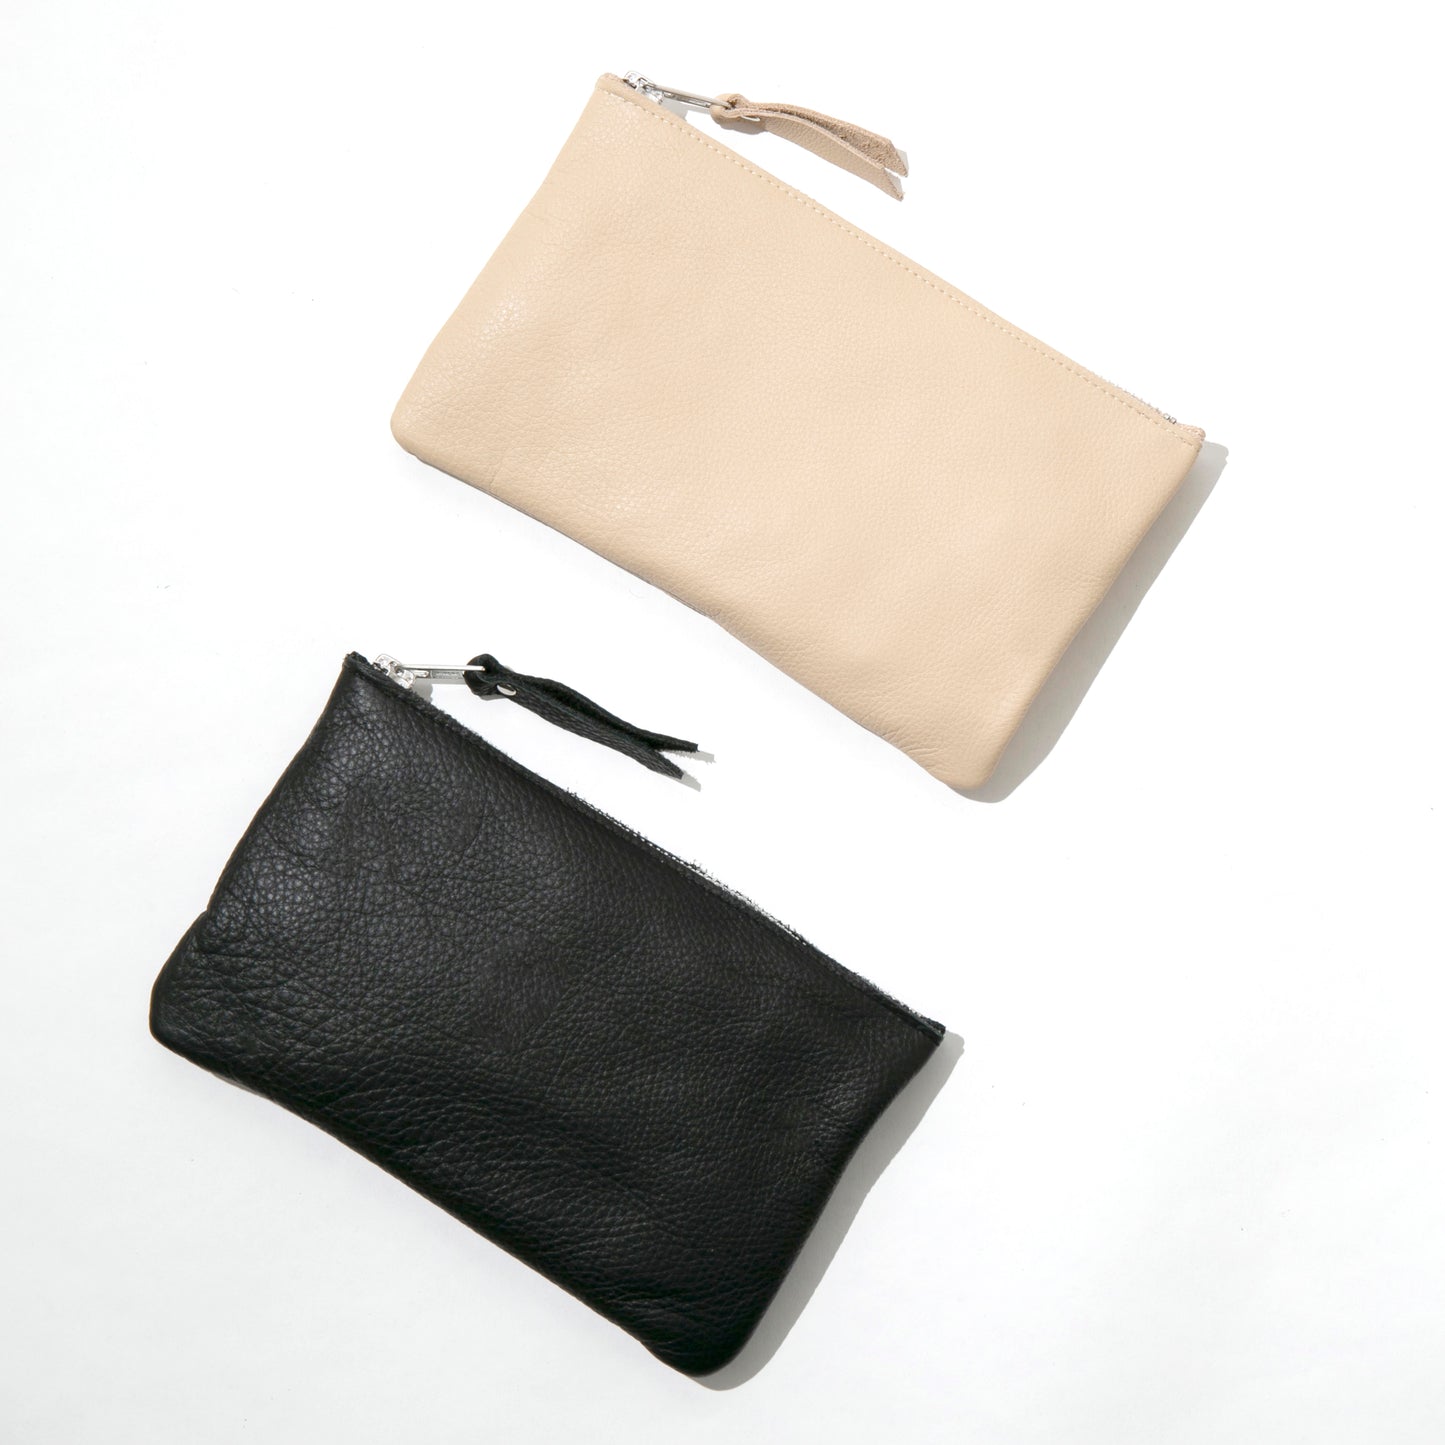 Black Leather Zip Pouch